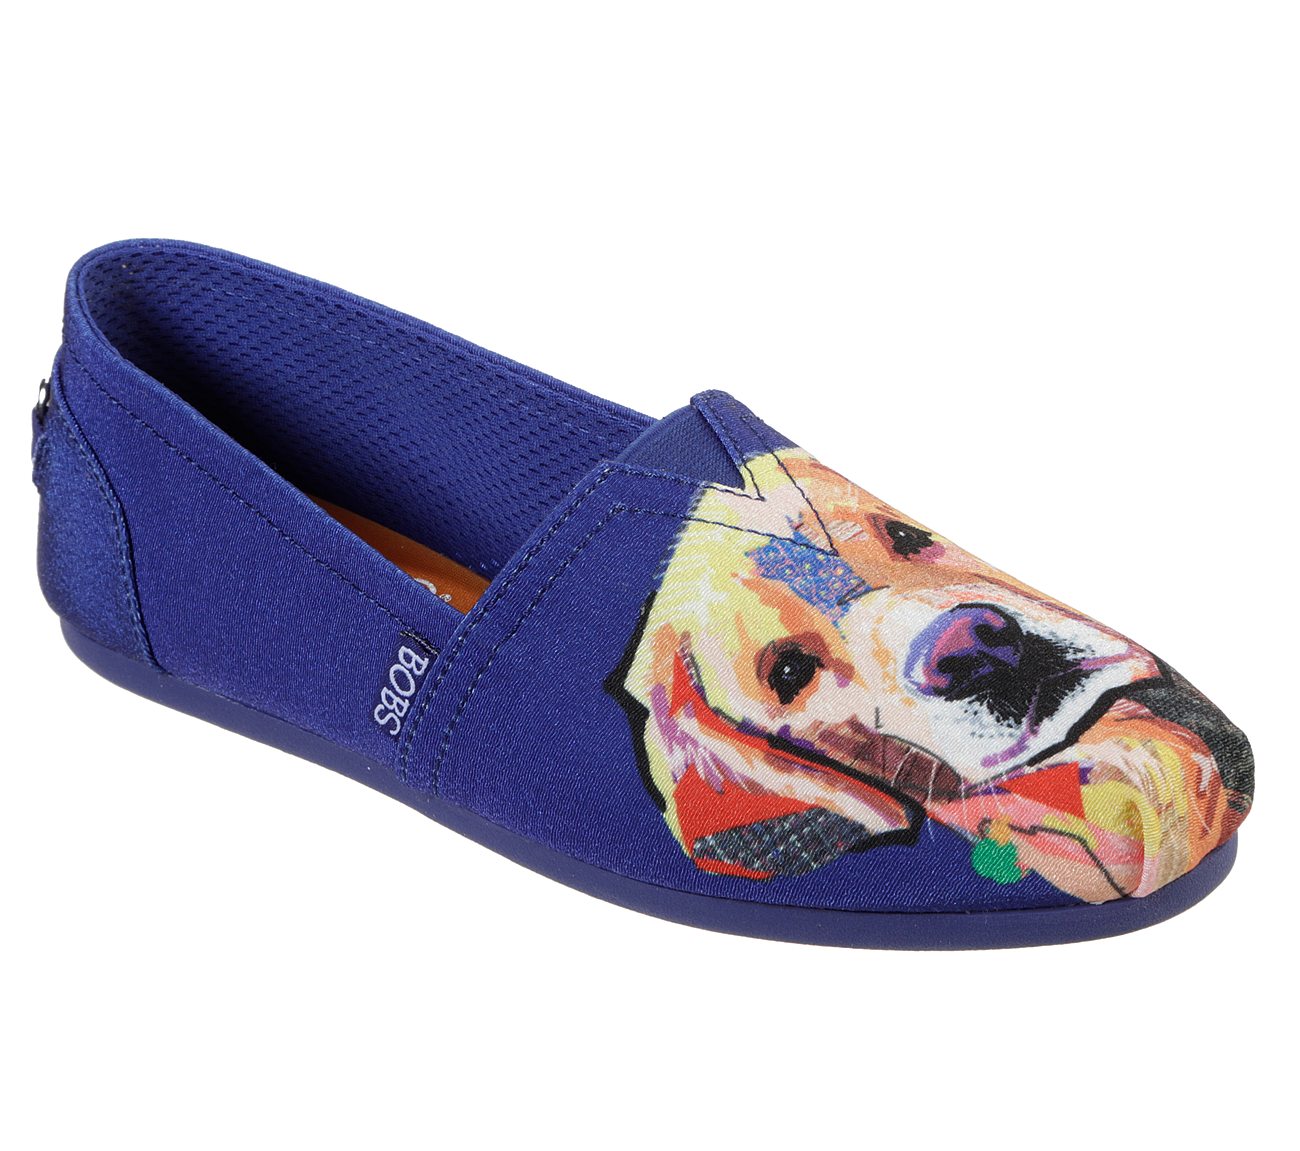 bobs for dogs canada off 77% - online 